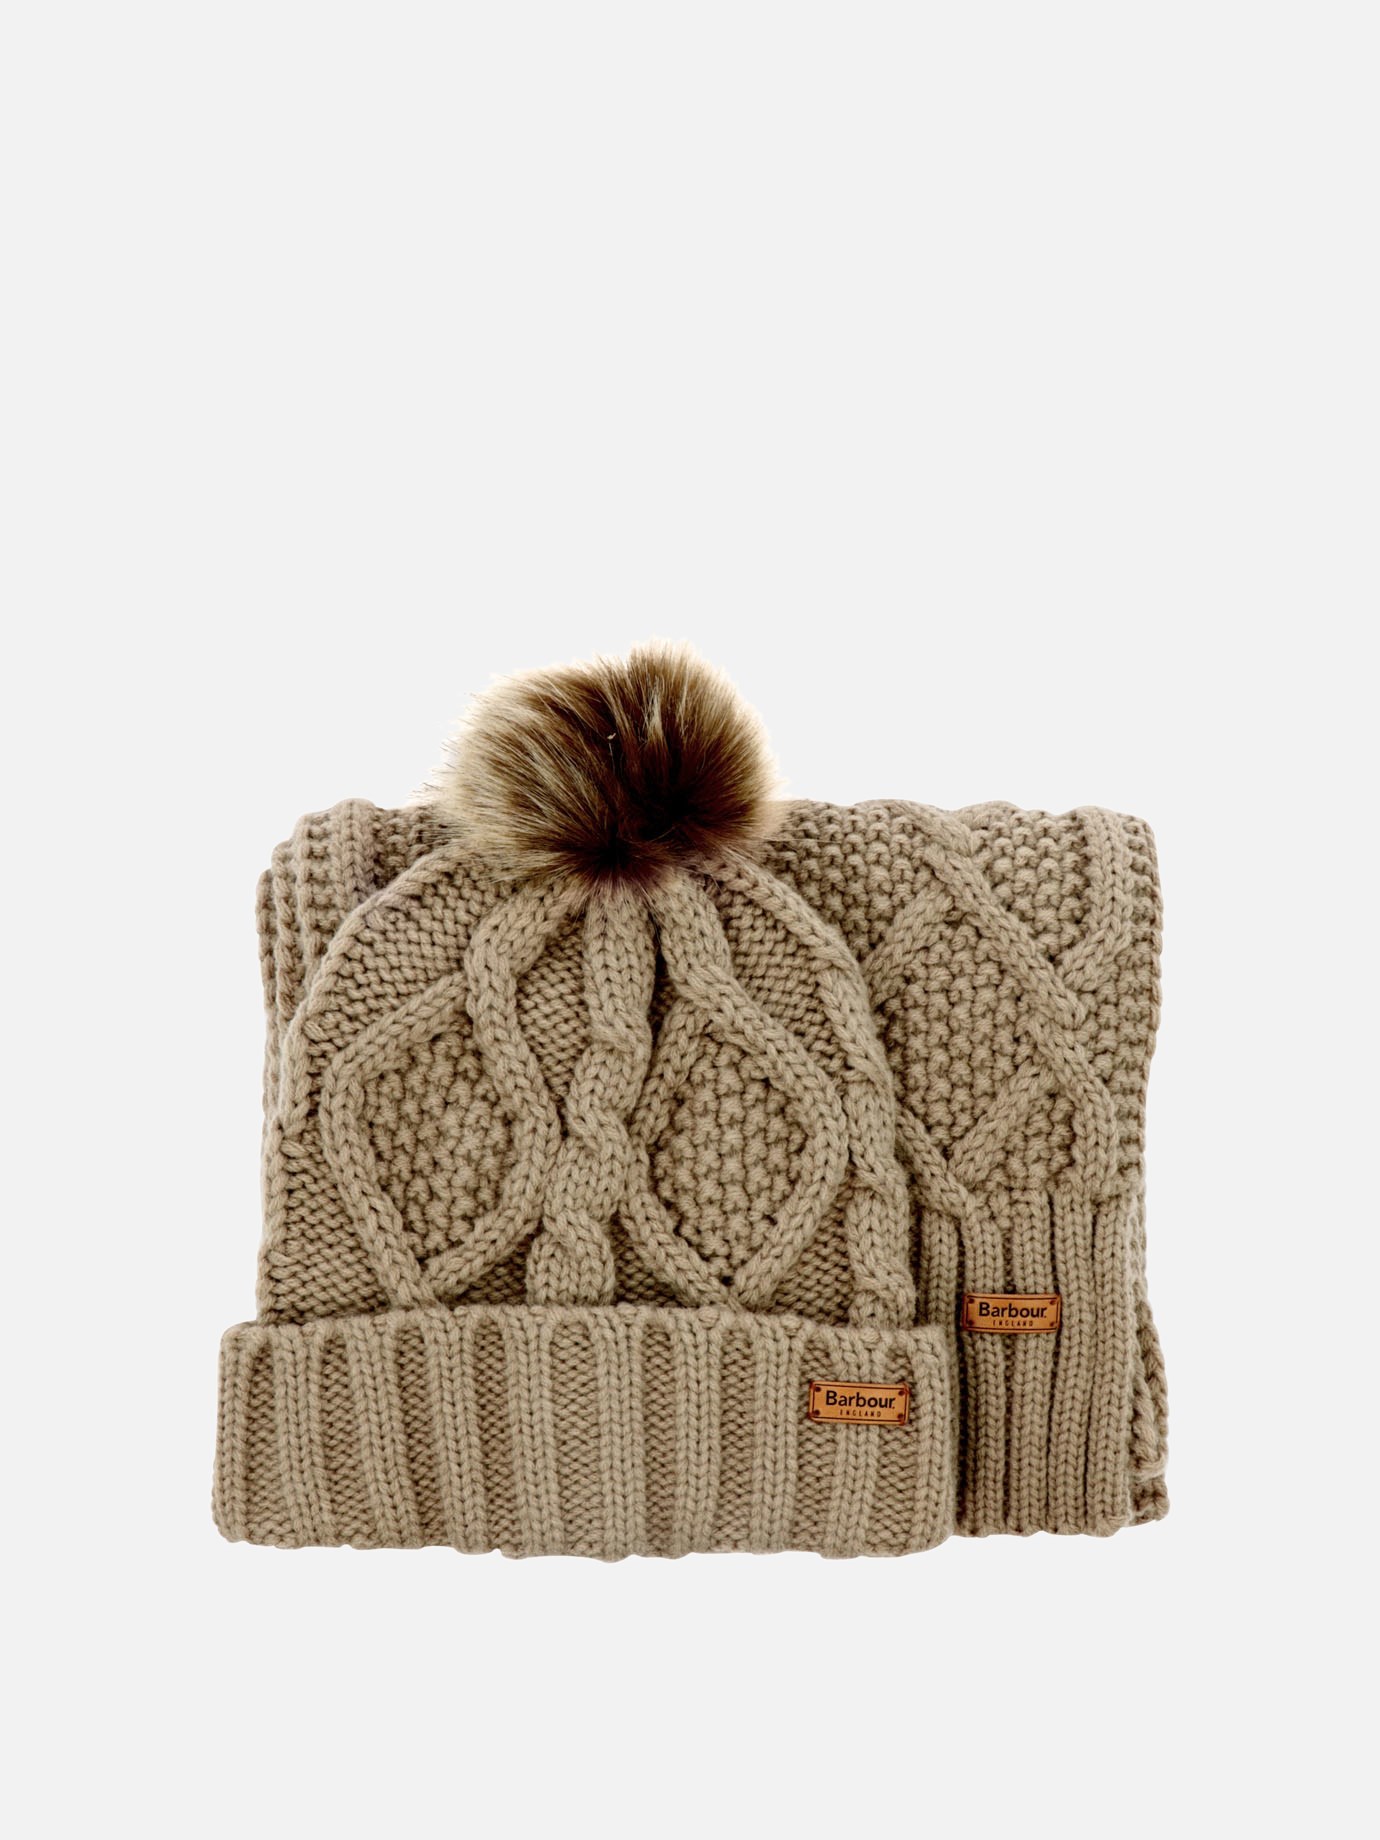  Ridley  beanie and scarf setby Barbour - 3